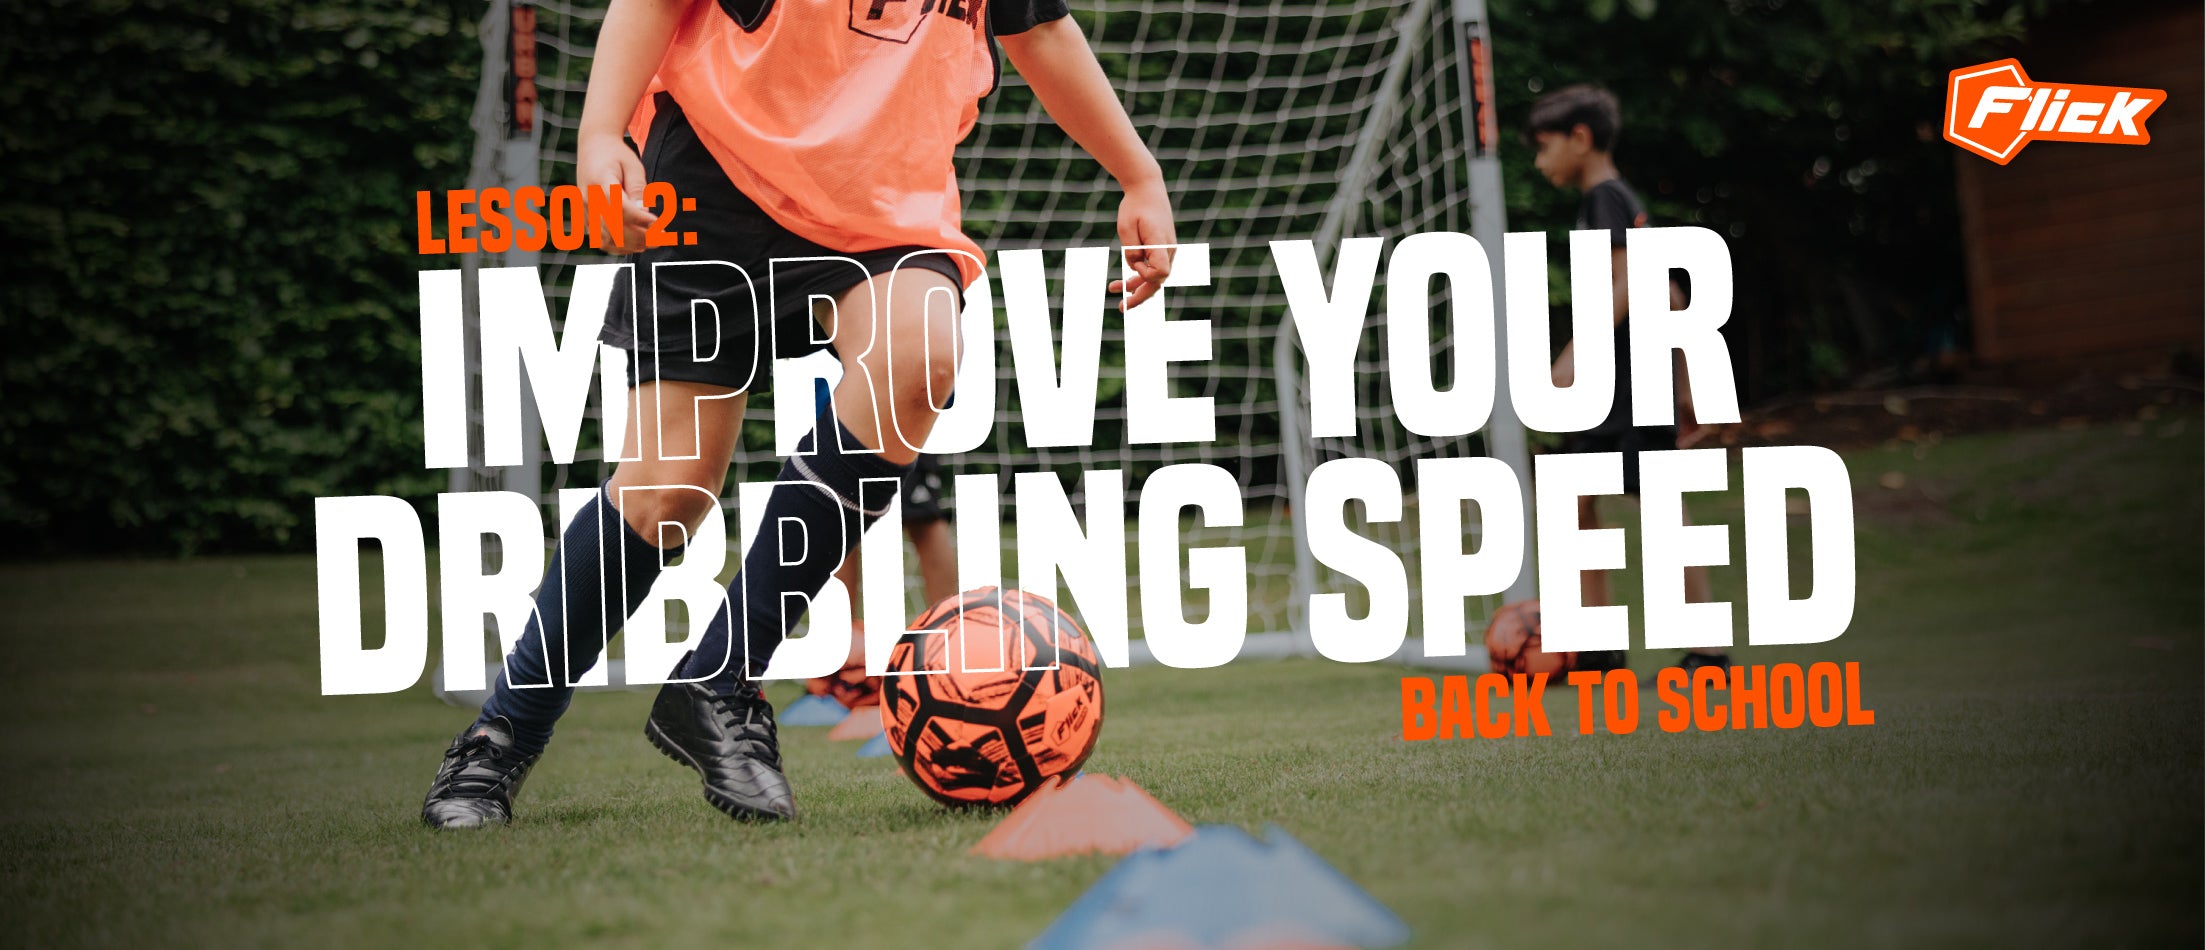 How to Improve Dribbling SPEED on the ball - Lesson 2 - Back to School